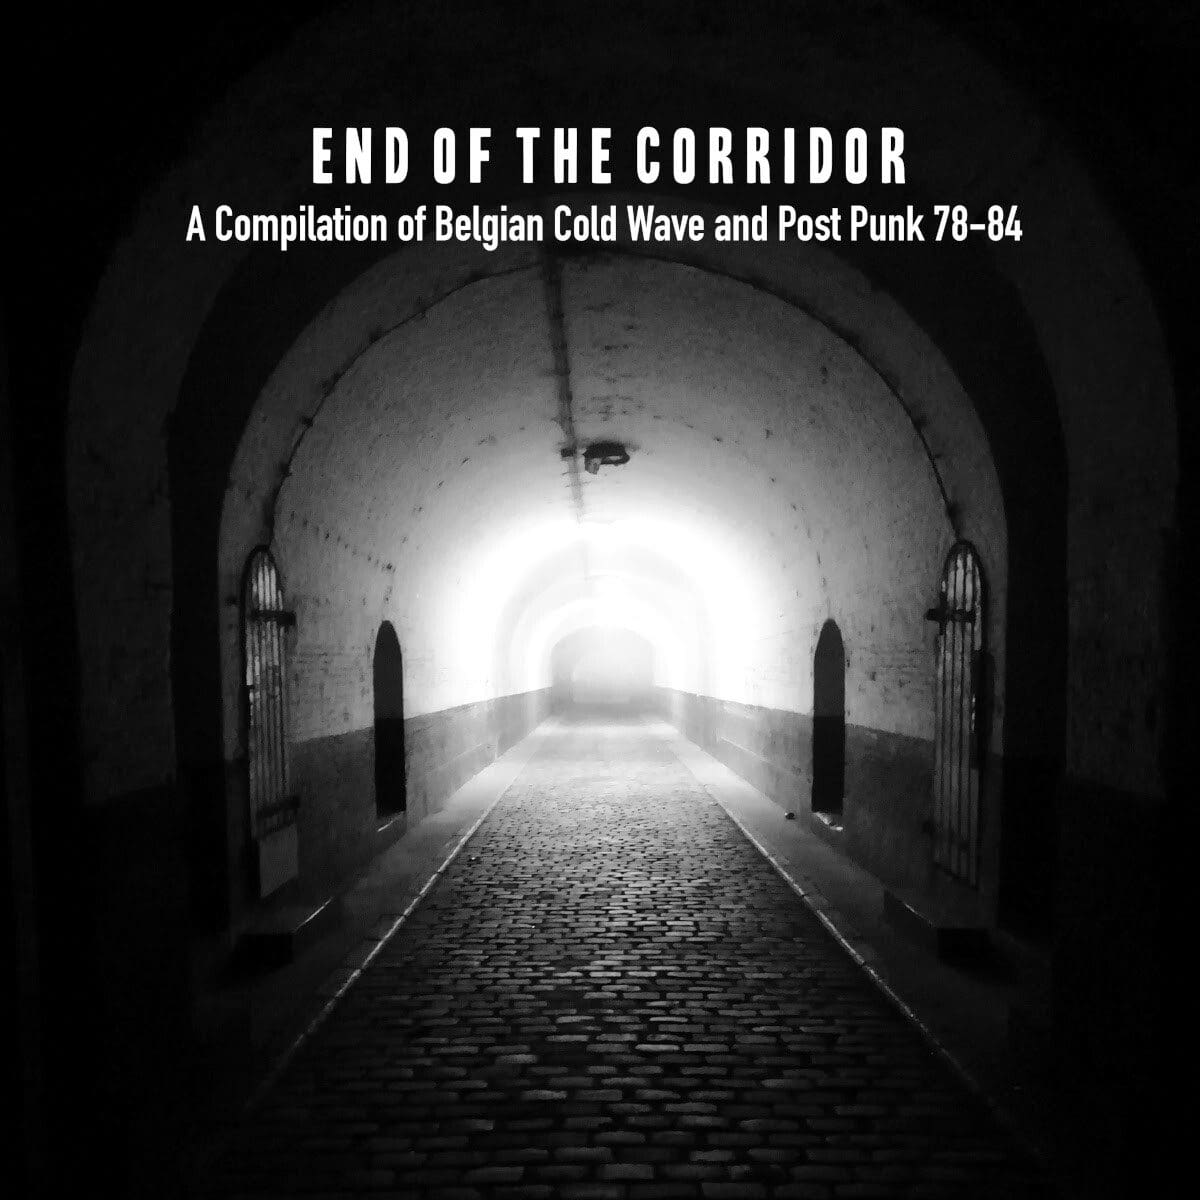 'End of Corridor' vinyl compilation of Belgian cold wave and post punk from 1978-84